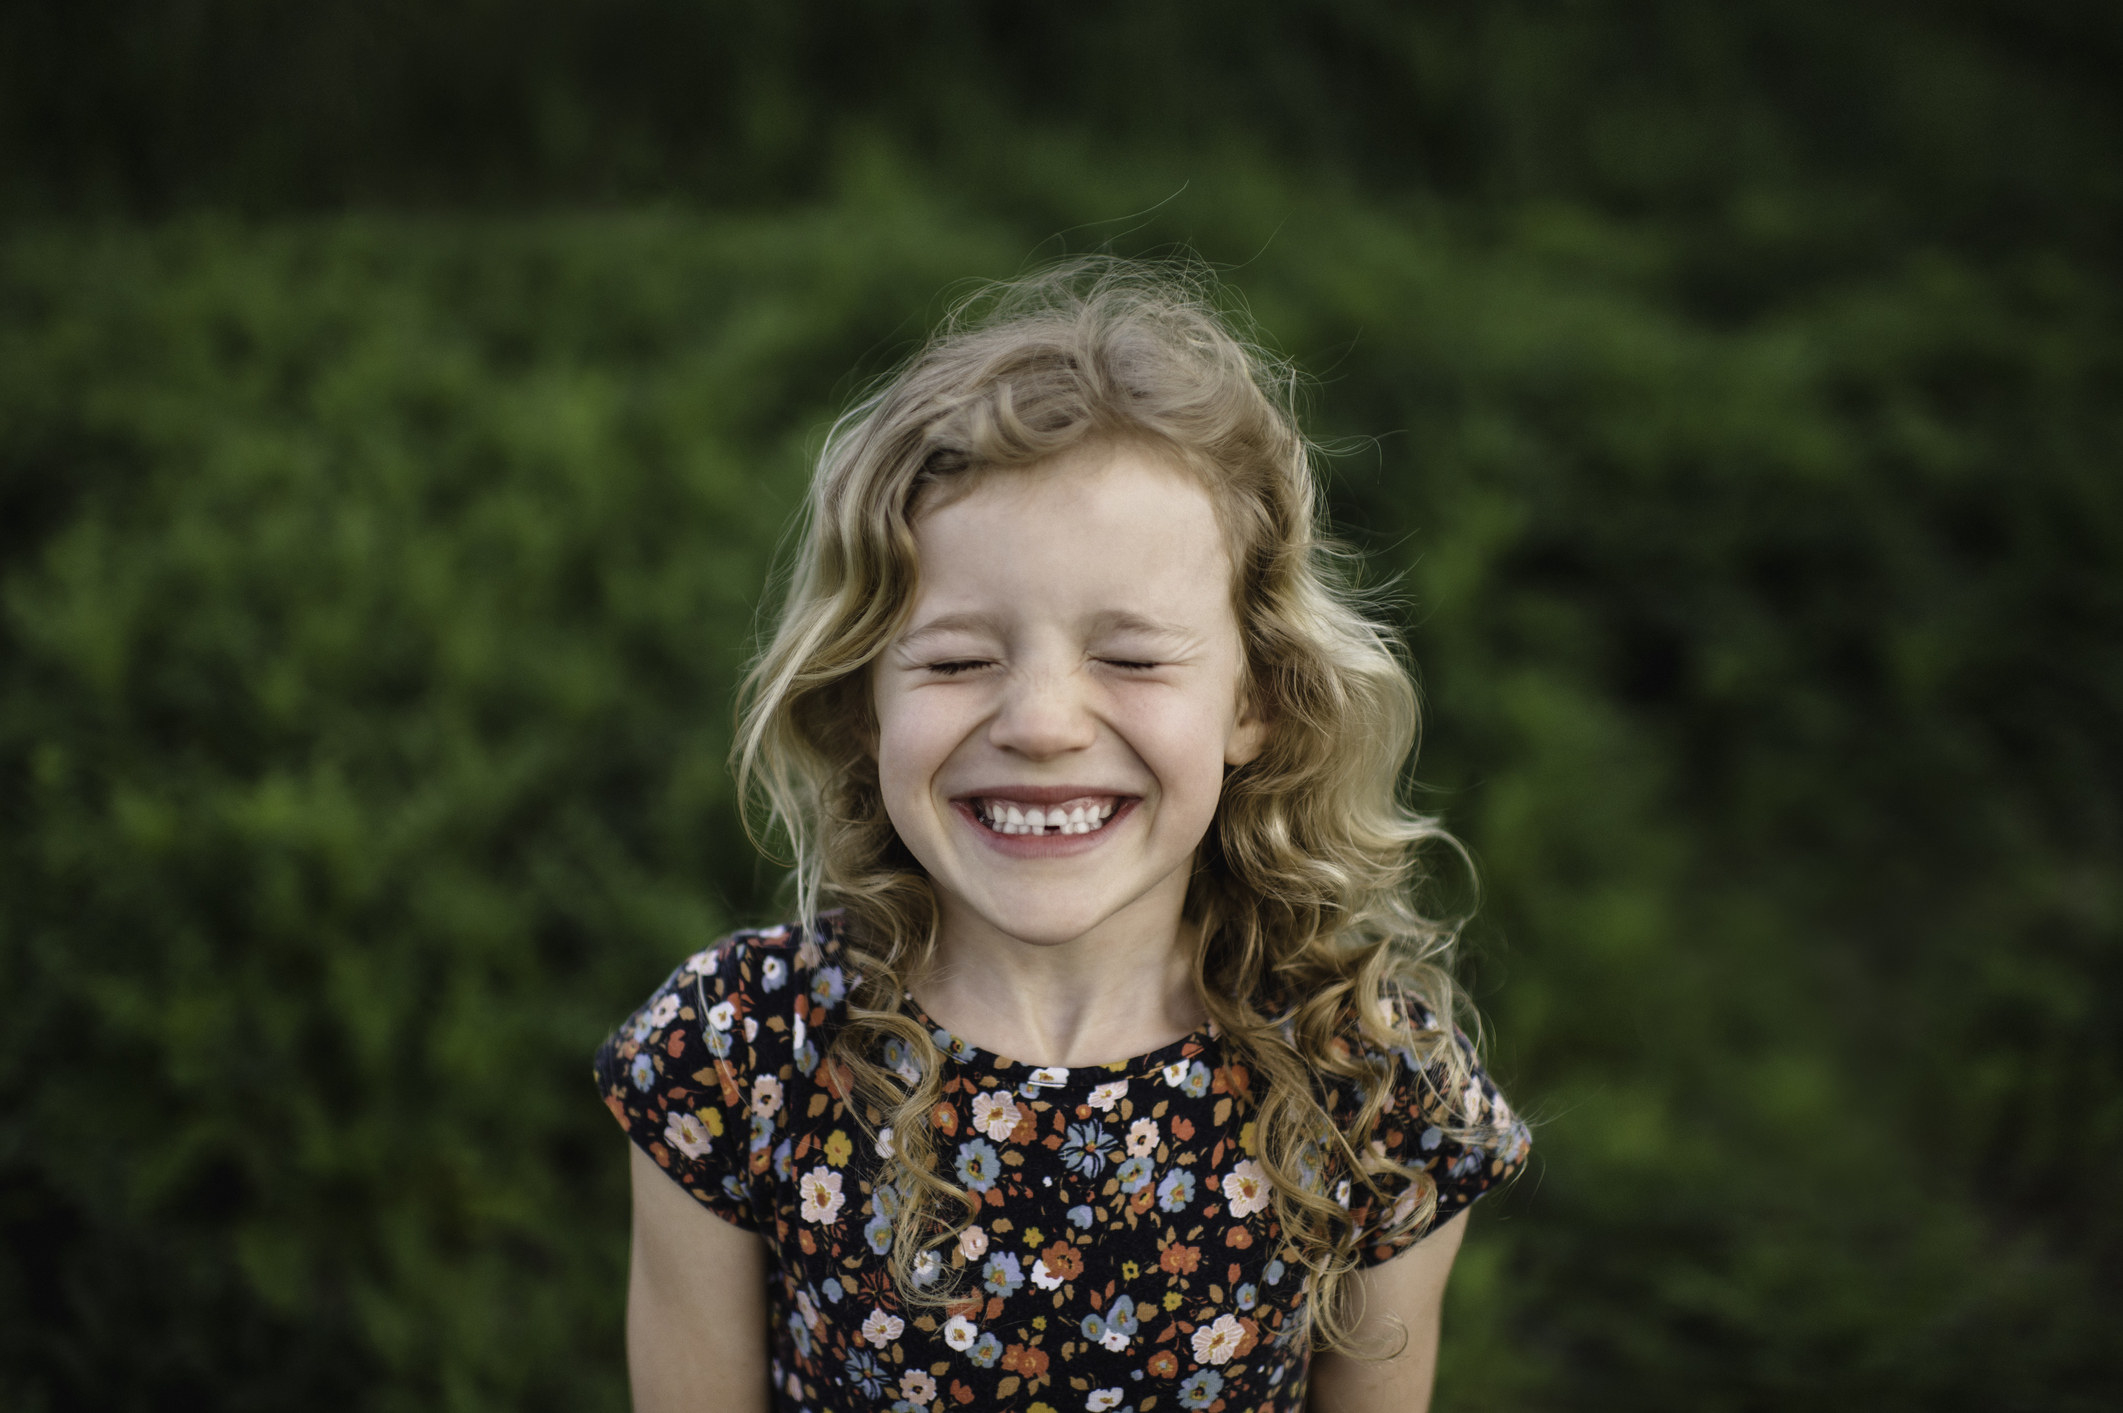 A little girl smiling